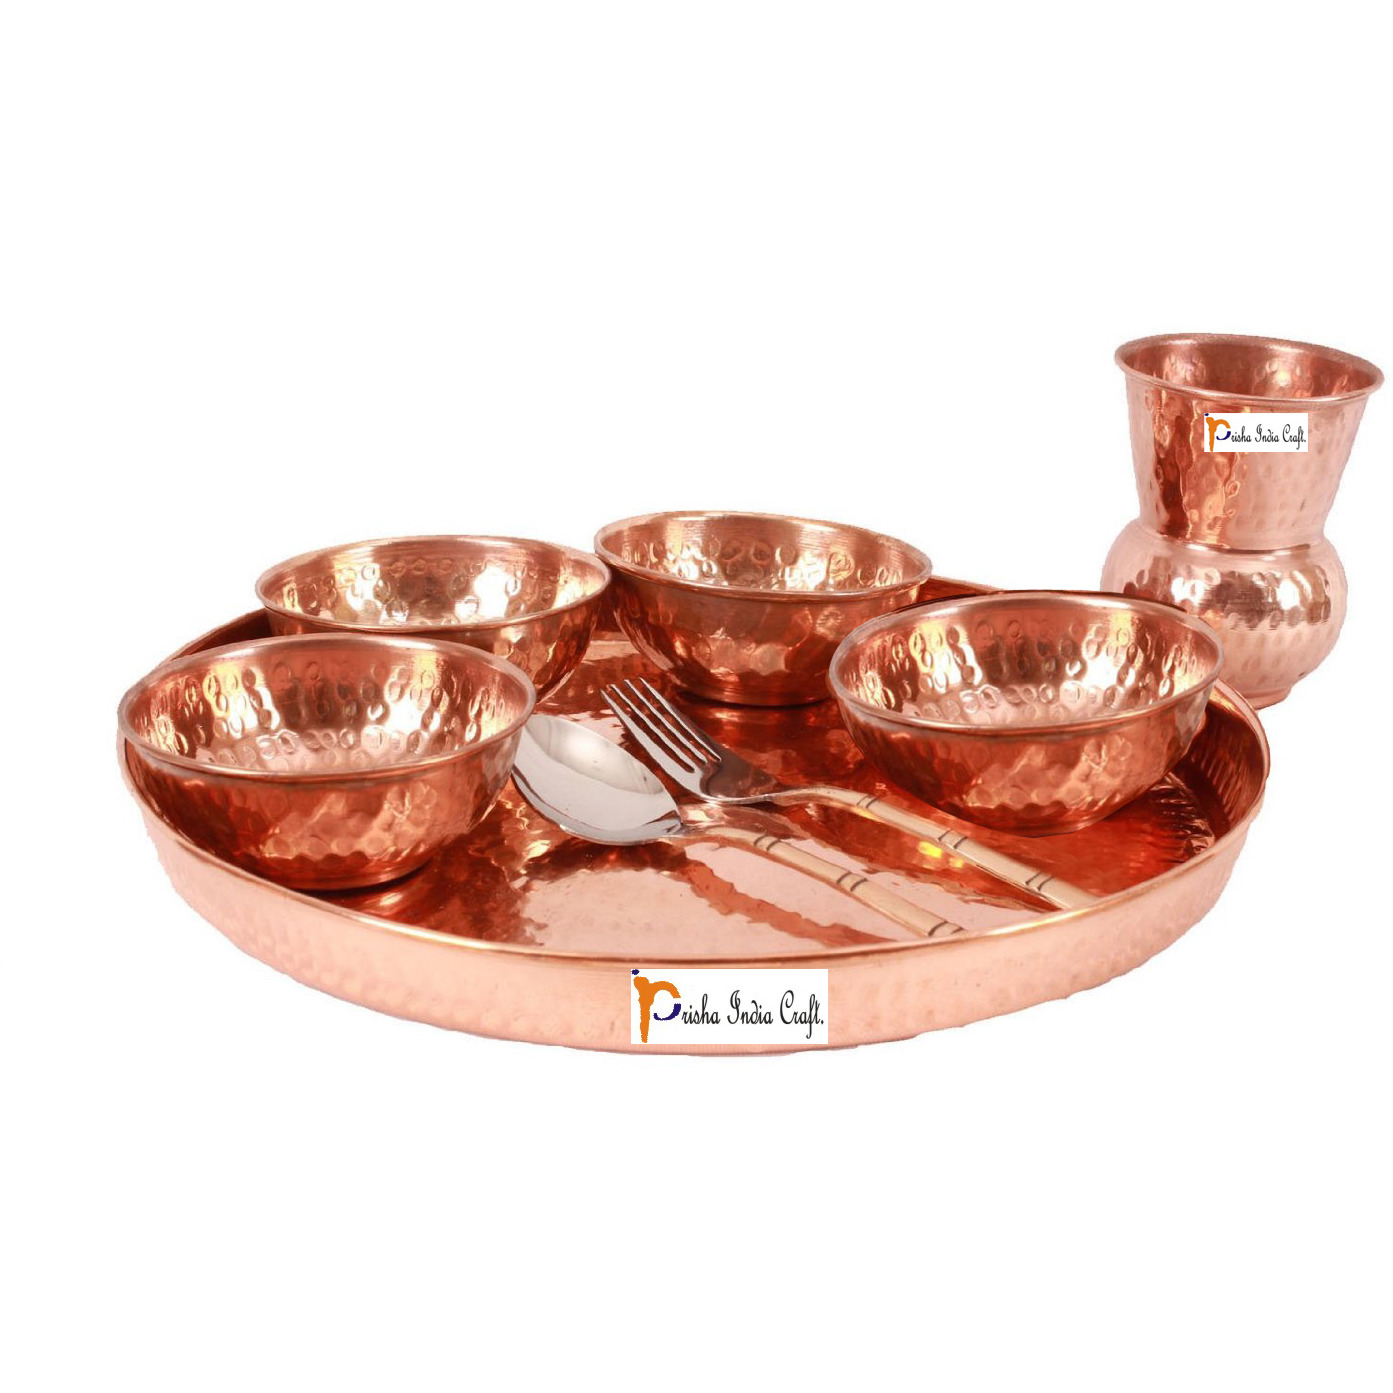 Prisha India Craft B. Set of 3 Dinnerware Traditional 100% Pure Copper Dinner Set of Thali Plate, Bowls, Glass and Spoon, Dia 12  With 1 Pure Copper Maharaja Pitcher Jug - Christmas Gift